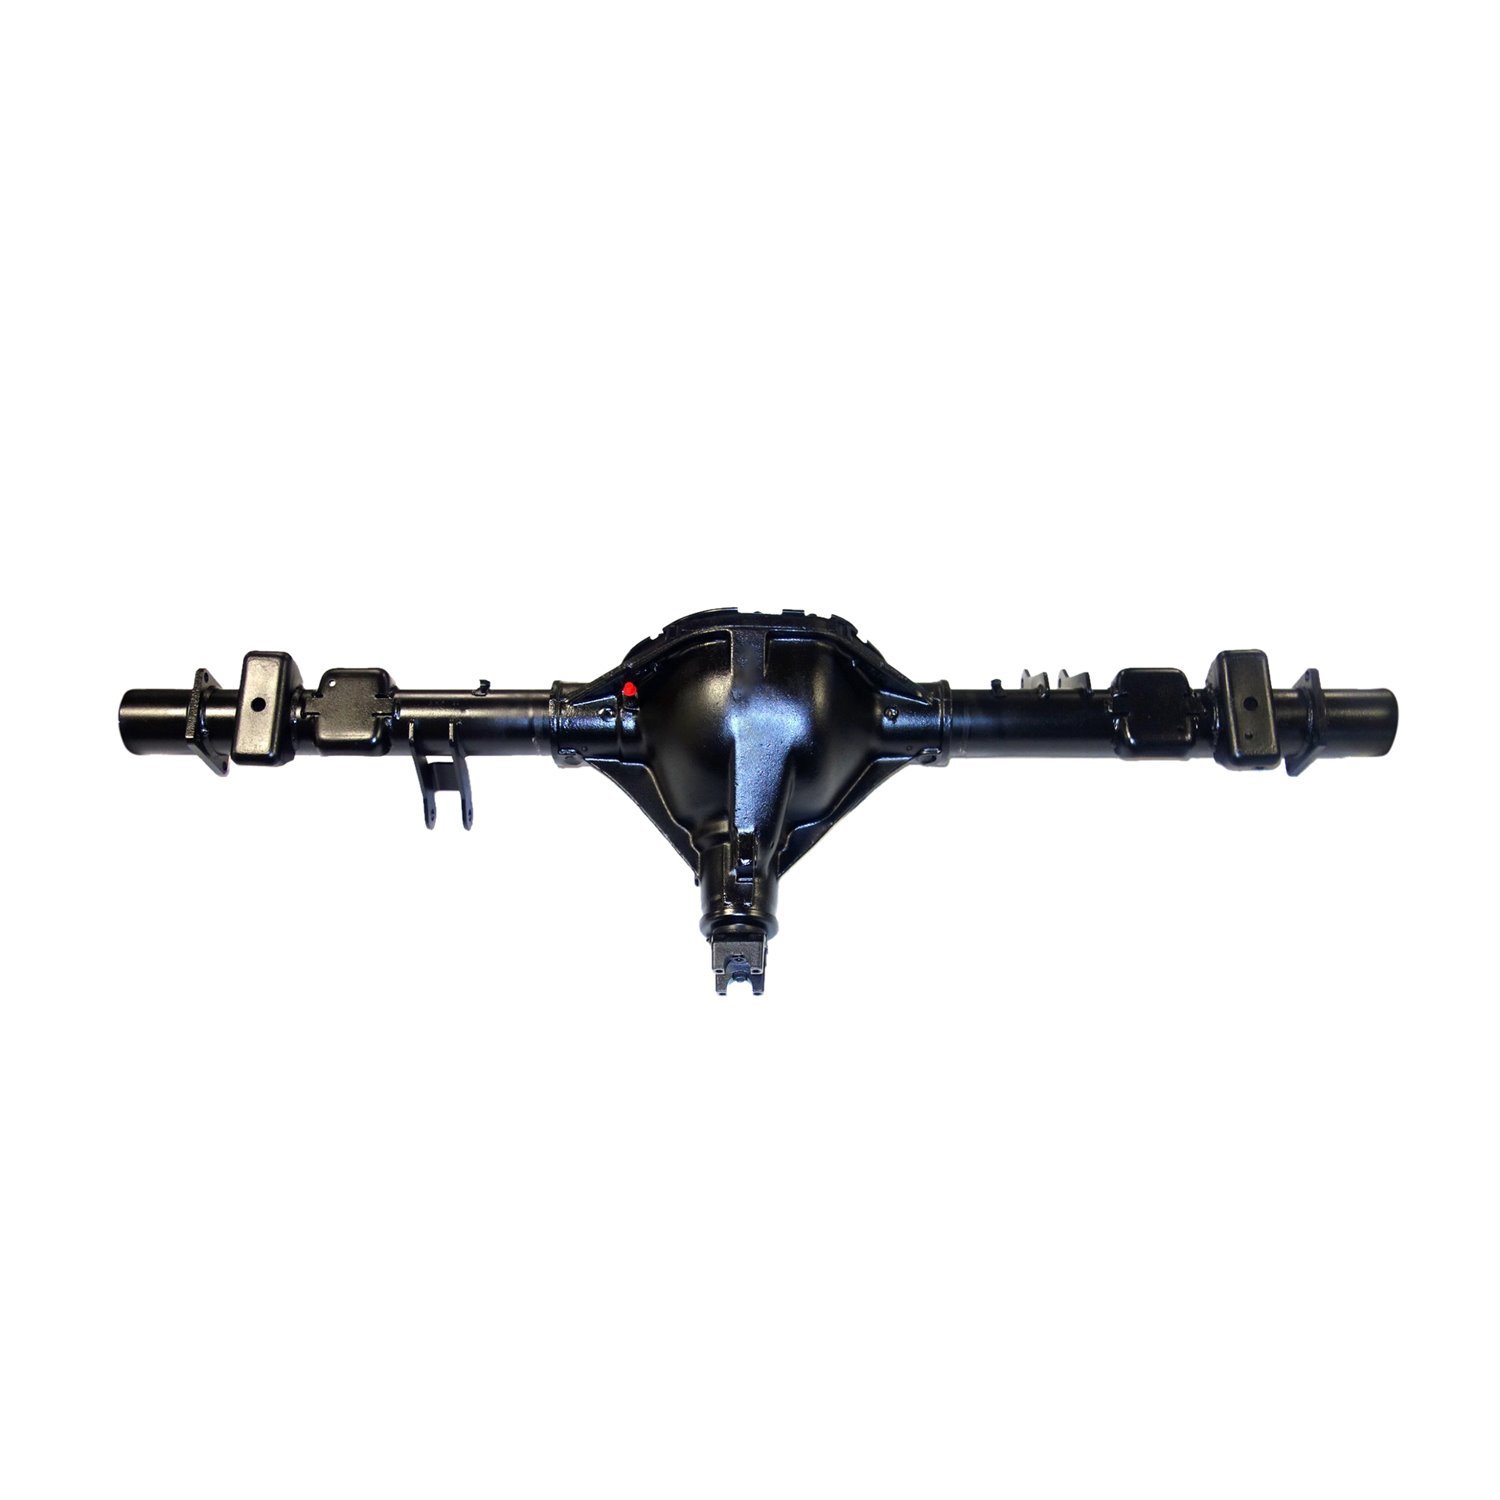 Remanufactured Complete Axle Assy for GM 9.5" 1994 GM Suburban 1500 3.73 , 4x4, Posi LSD